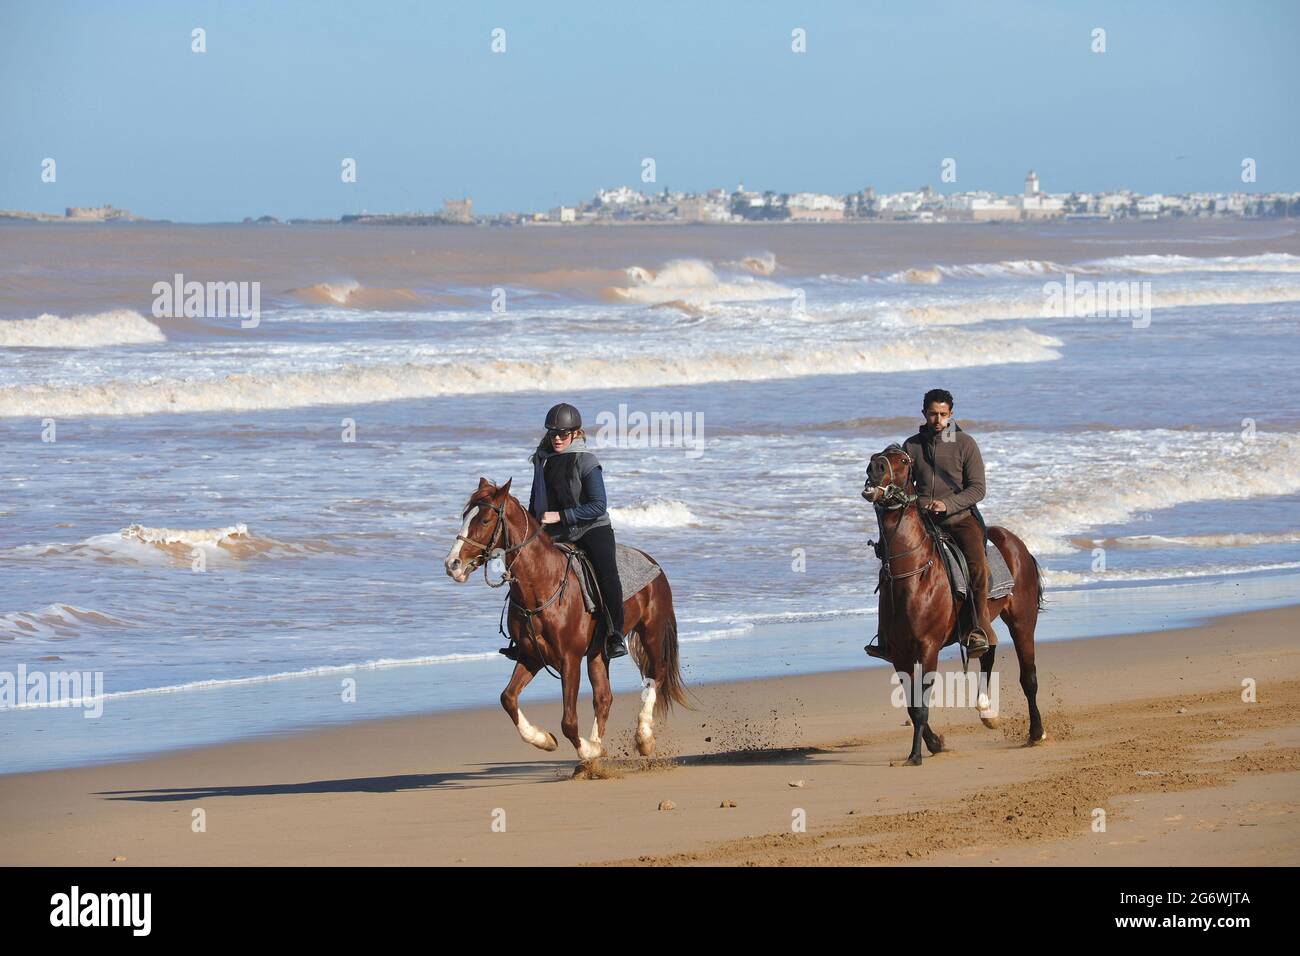 MOROCCO. THE SOUTH, ESSAOUIRA. 8KL DOWN SOUTH, THE BEACH OF DIABAT IS FAMOUS FOR ITSCAFE JIMMY HENDRIX WHO LIVED HERE FORT A WHILE IN THE 70IES. THE B Stock Photo